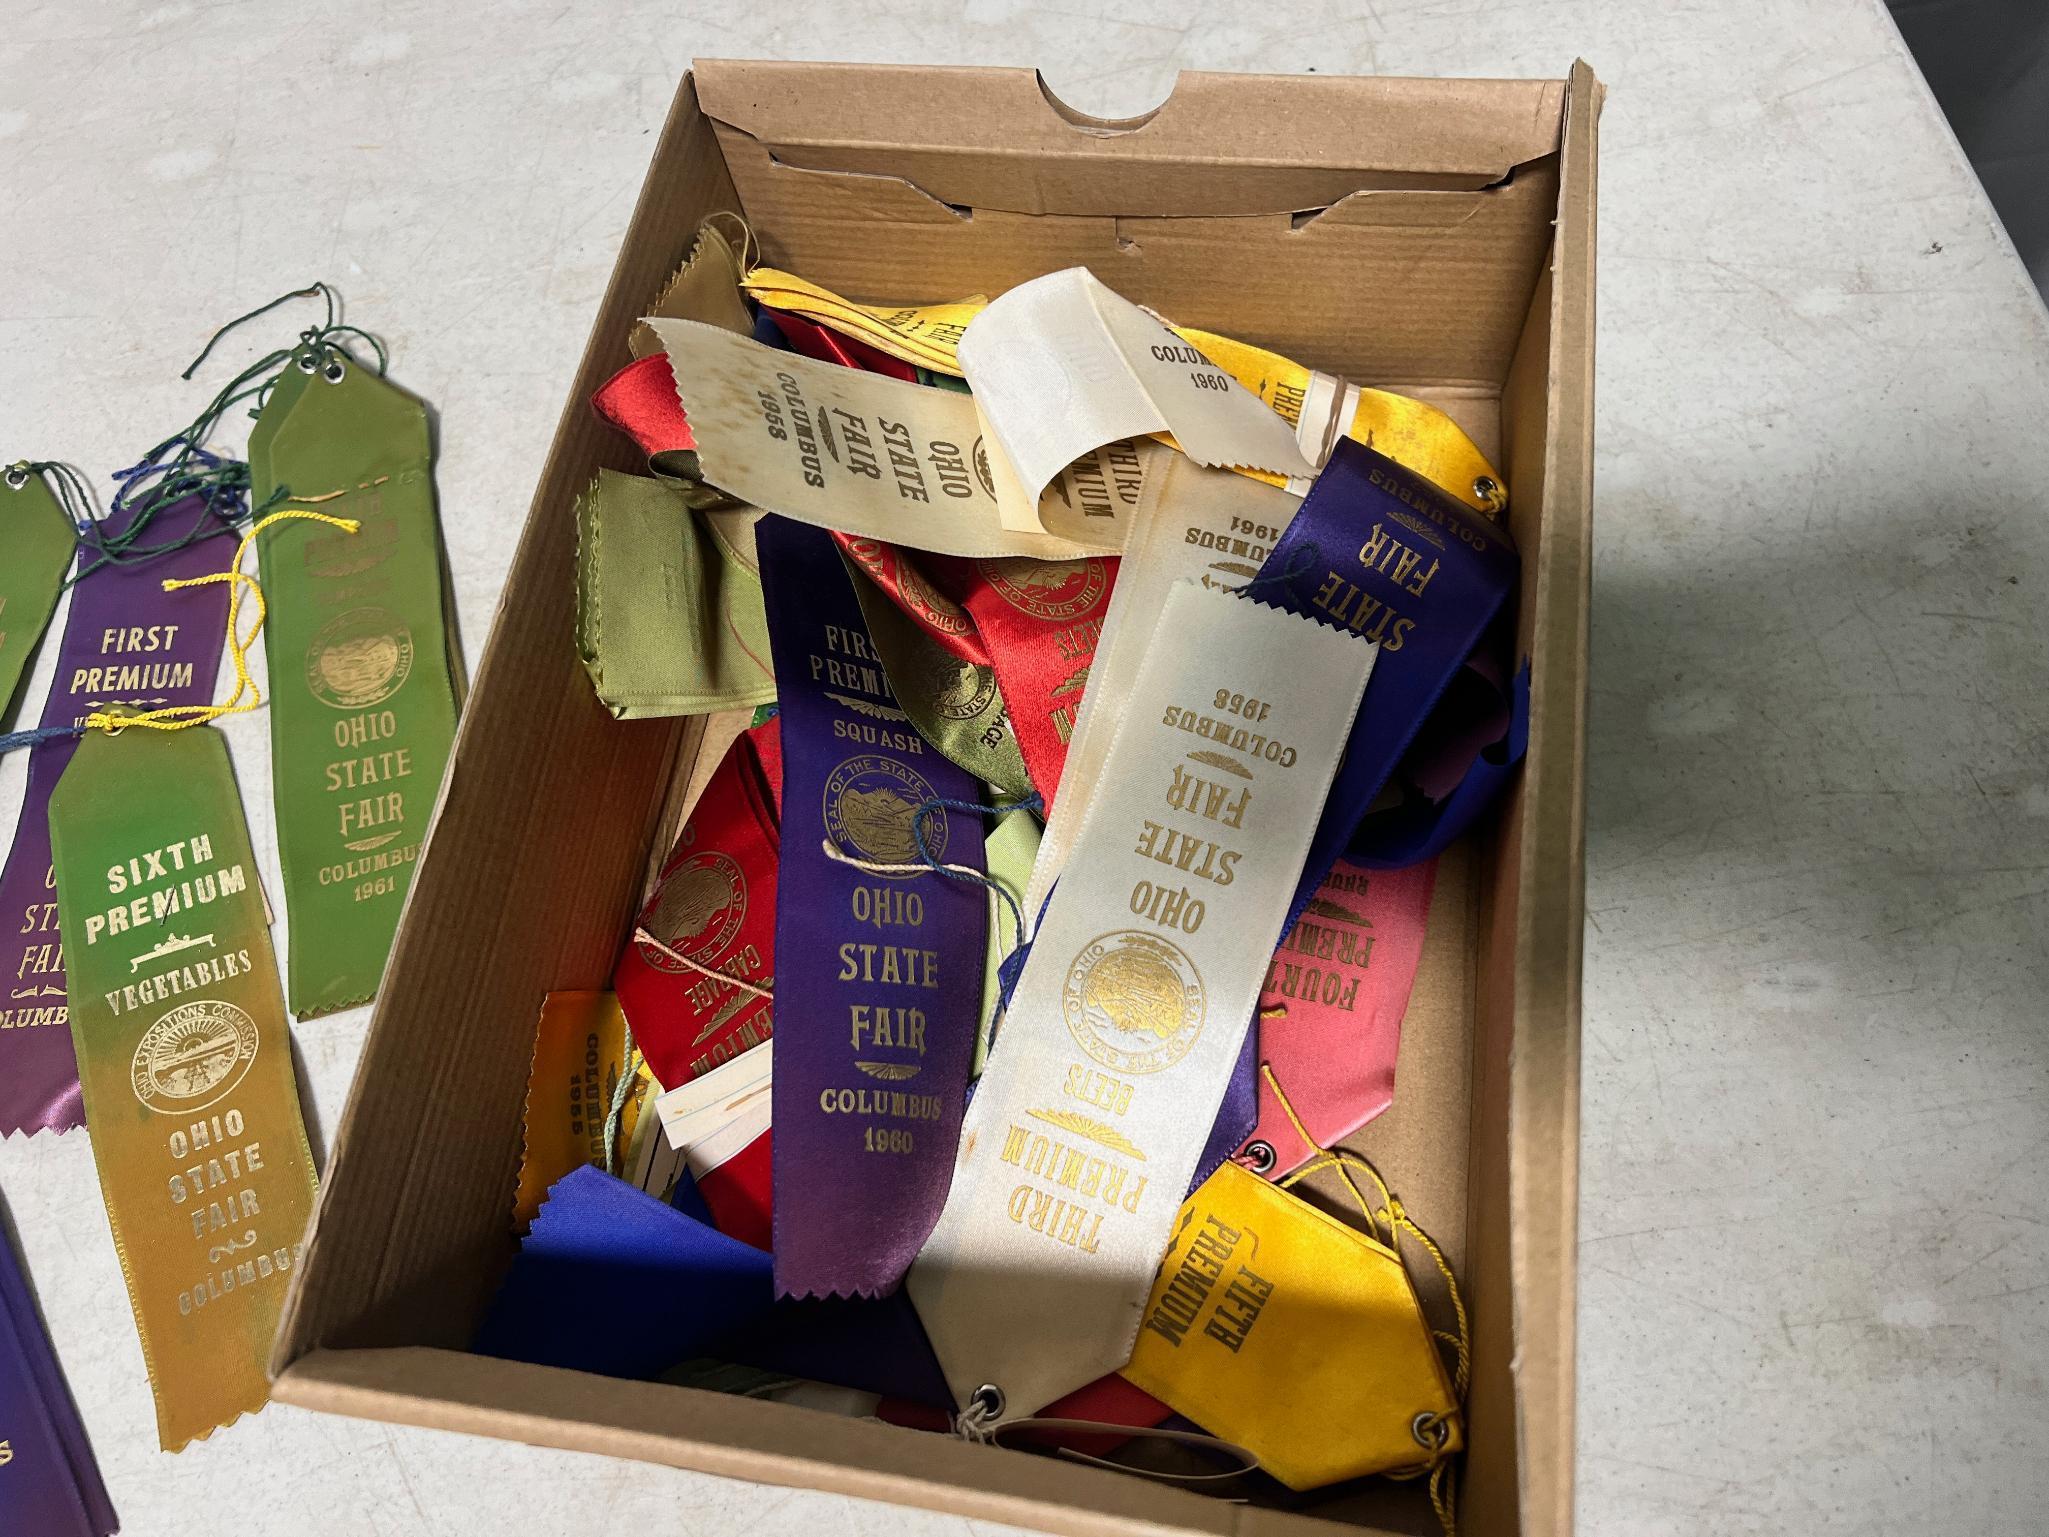 Vintage Ohio State Fait Ribbons from 1950's and 60's for Various vegetable entries